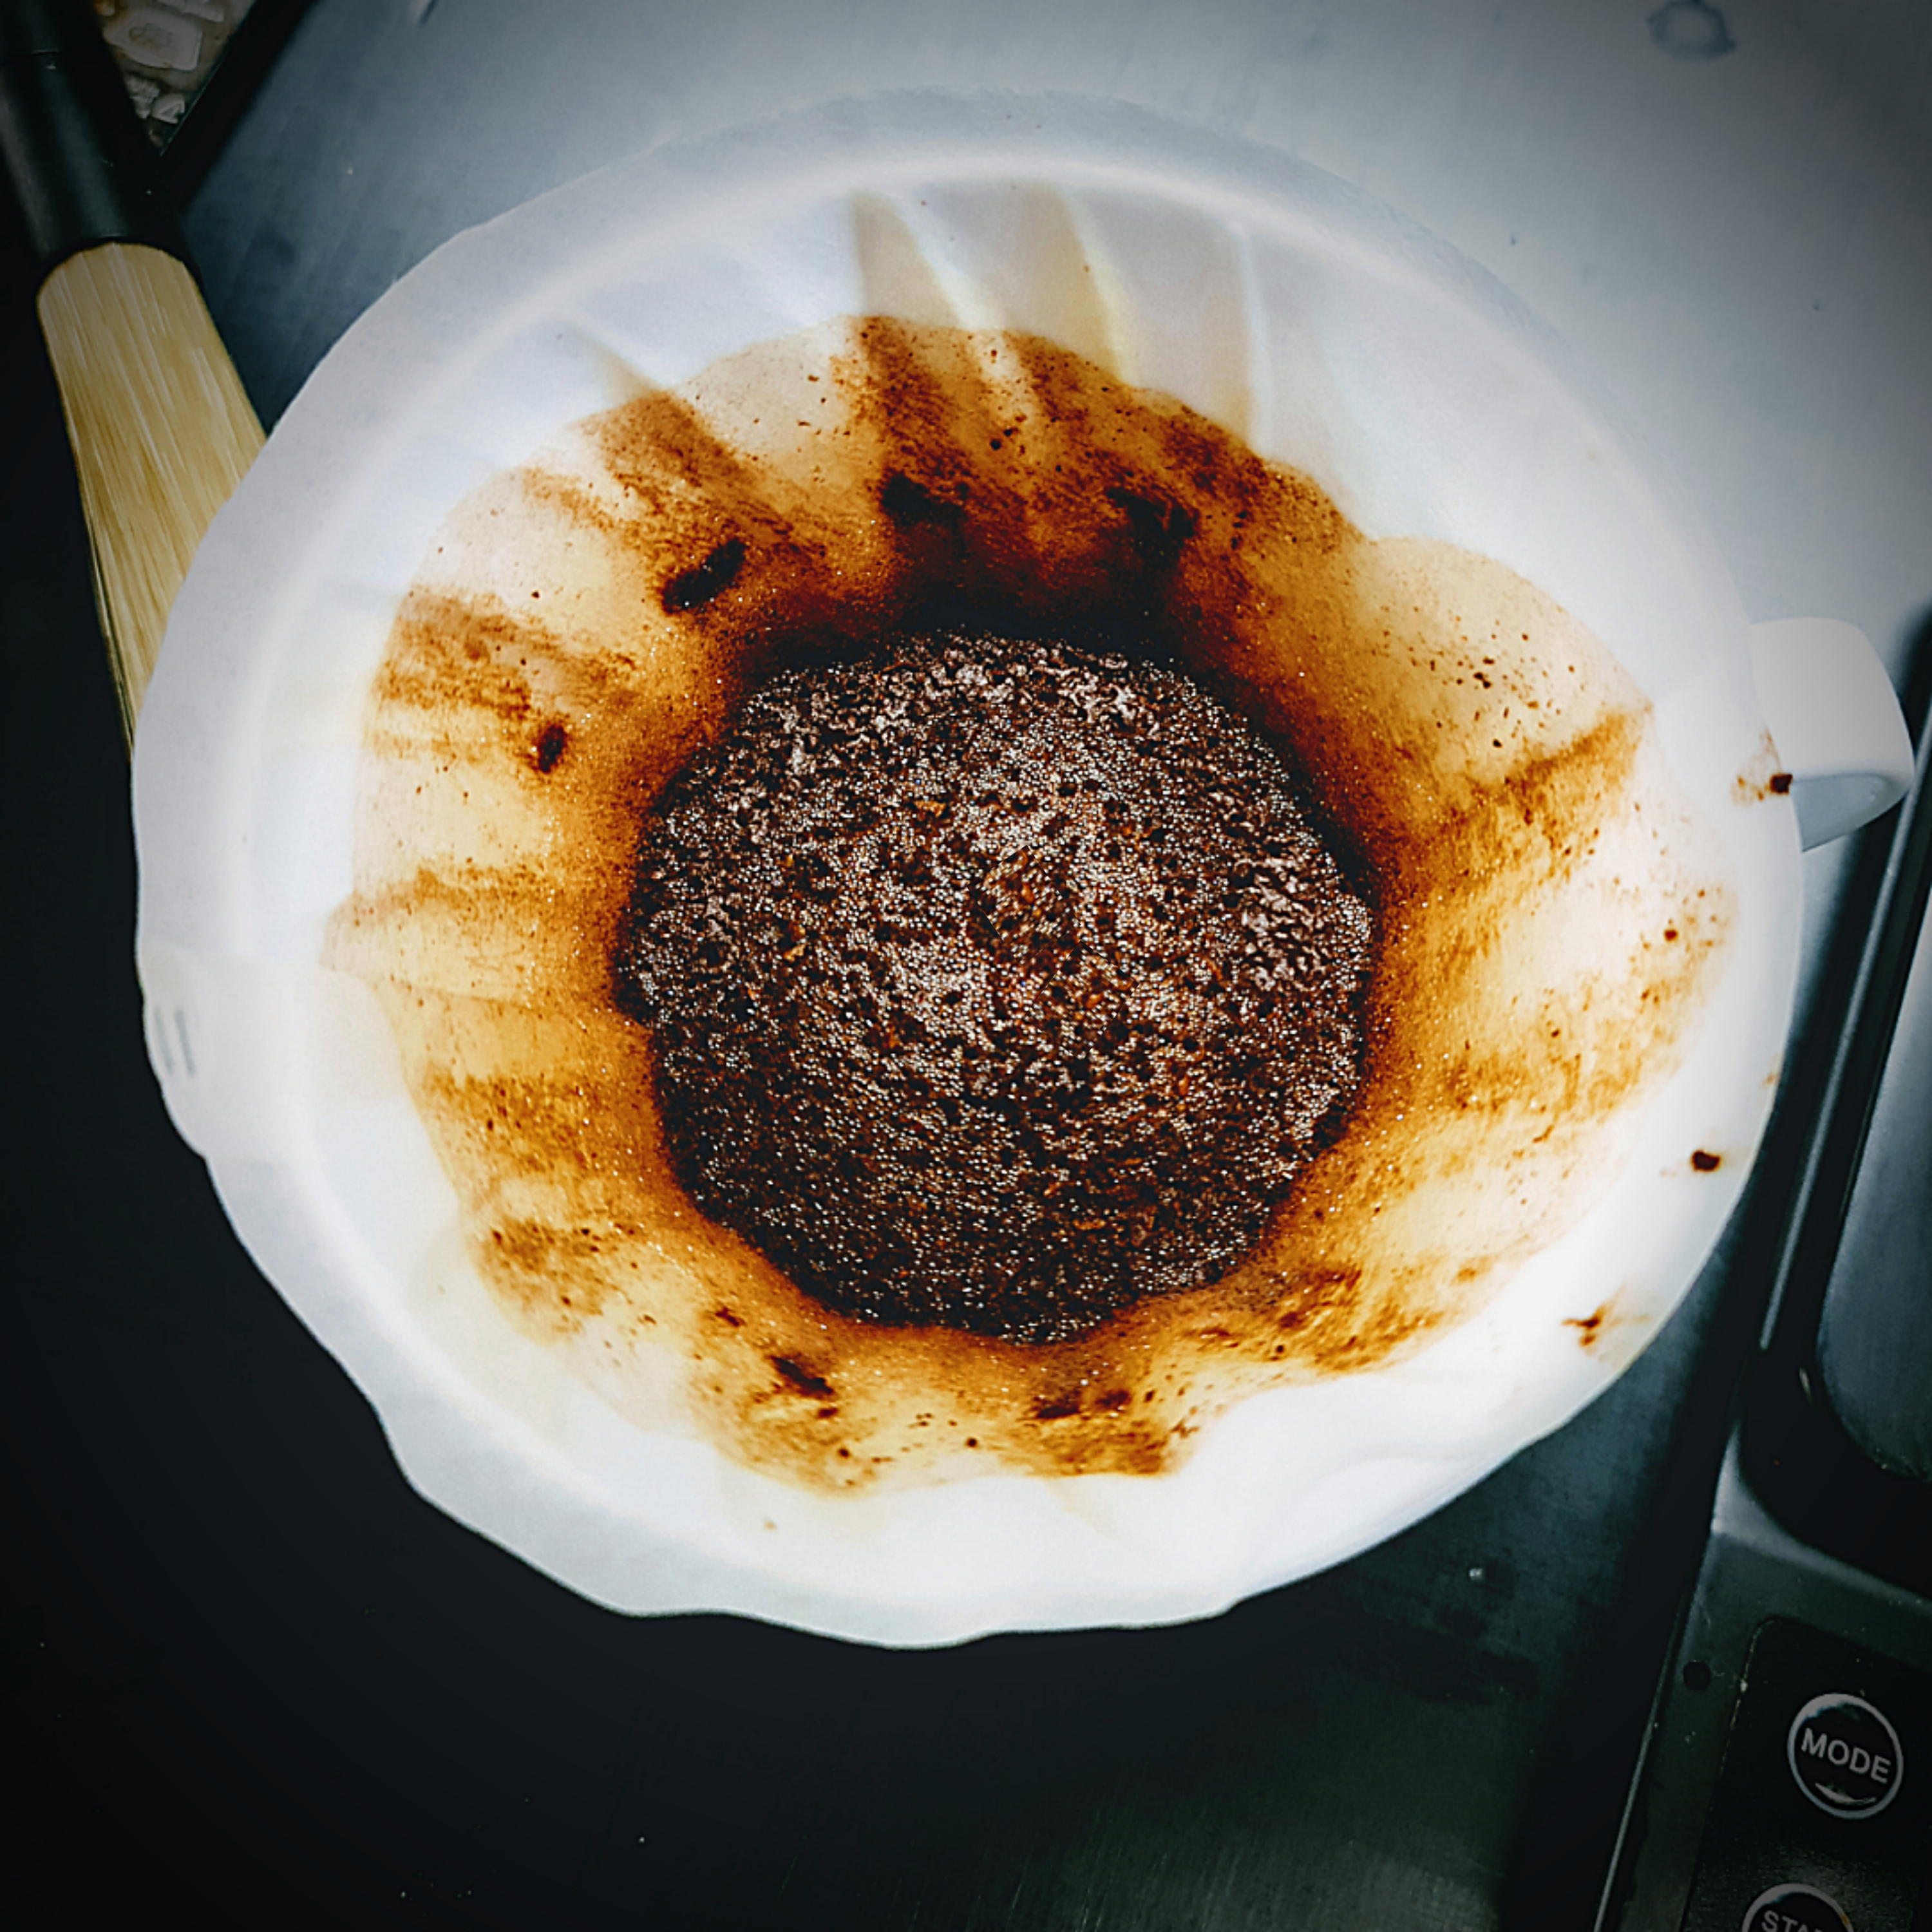 Completed V60 Pour Over Coffee in Filter paper with flat coffee bed